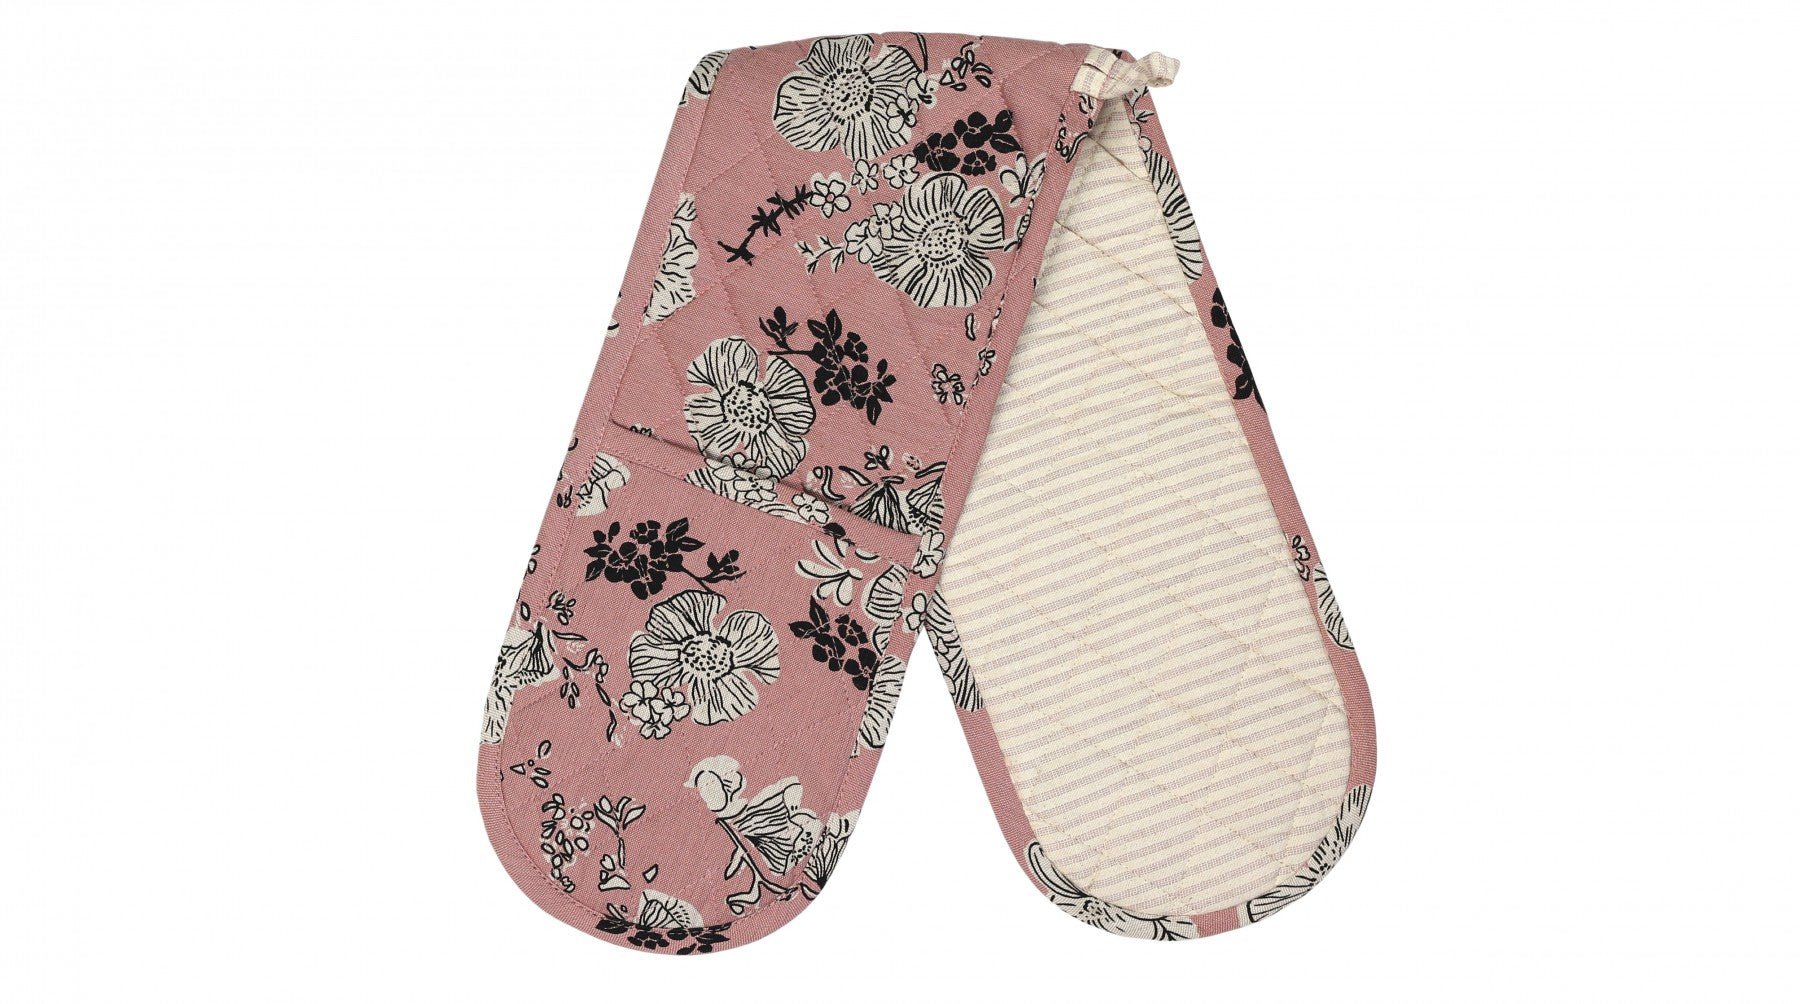 A light pink oven glove with rose design in black and white and pink stripe reverse side